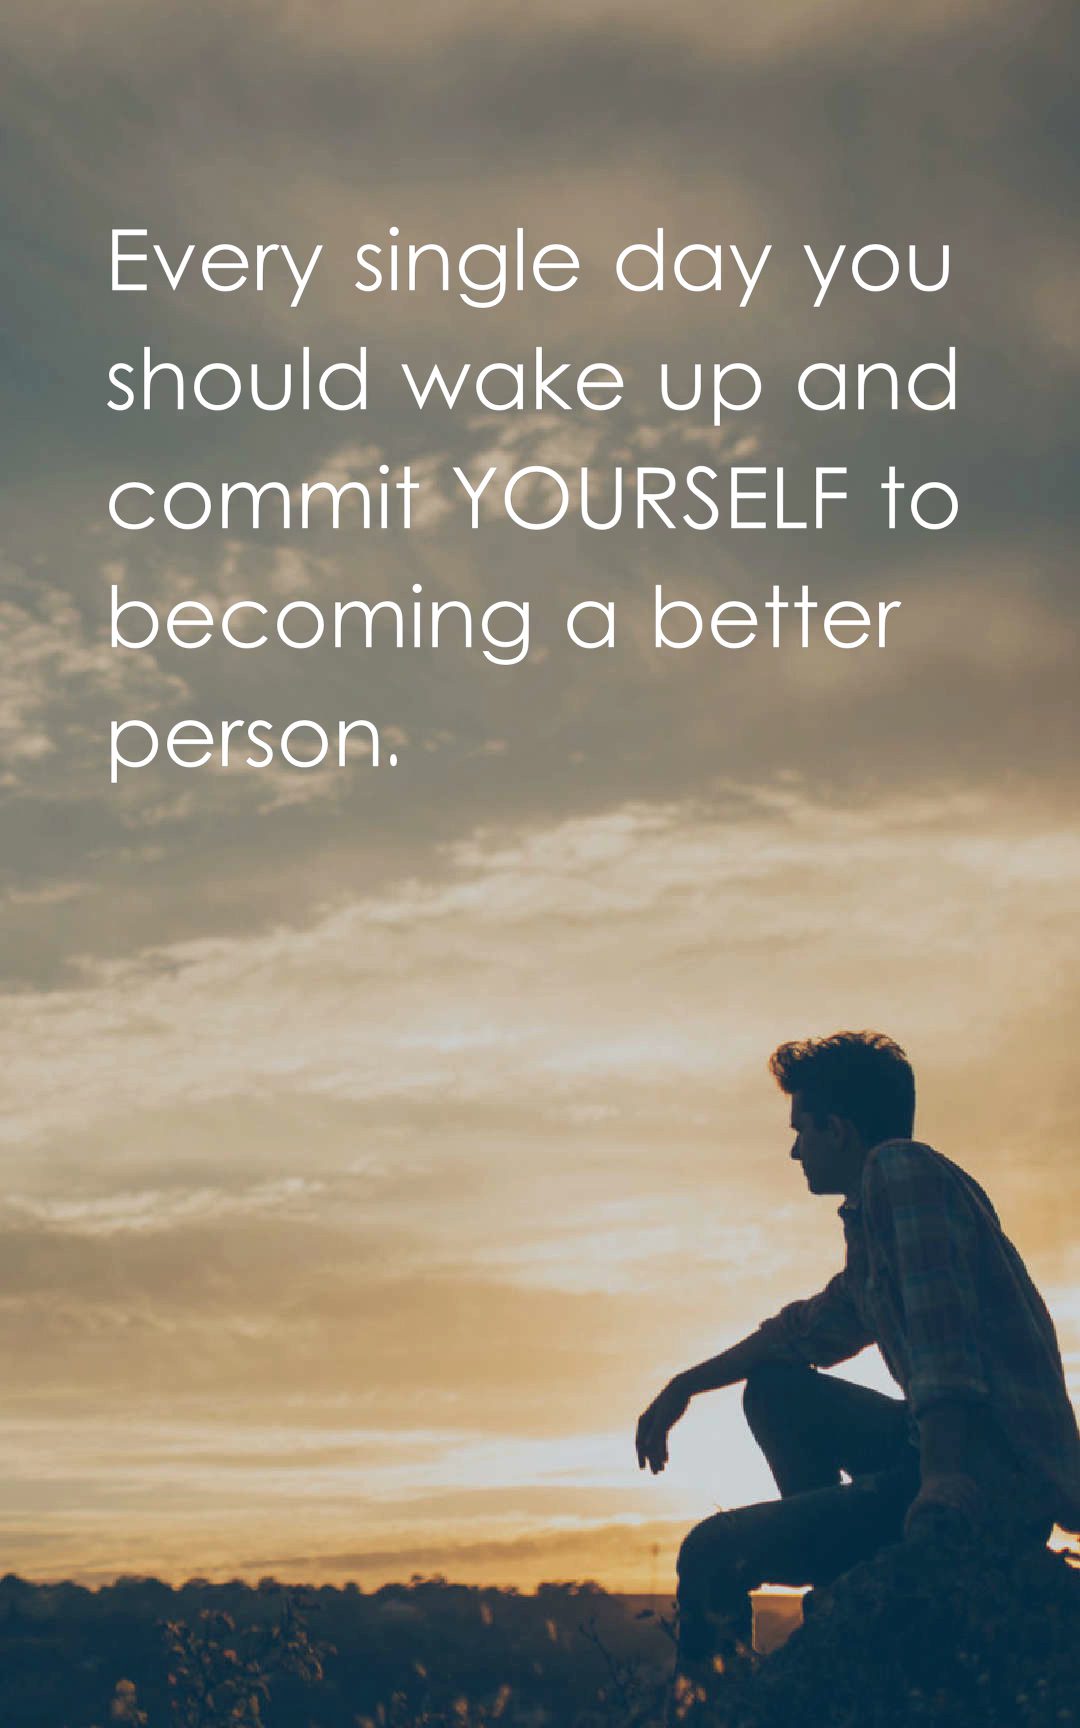 Every single day you should wake up and commit yourself to becoming a better person.